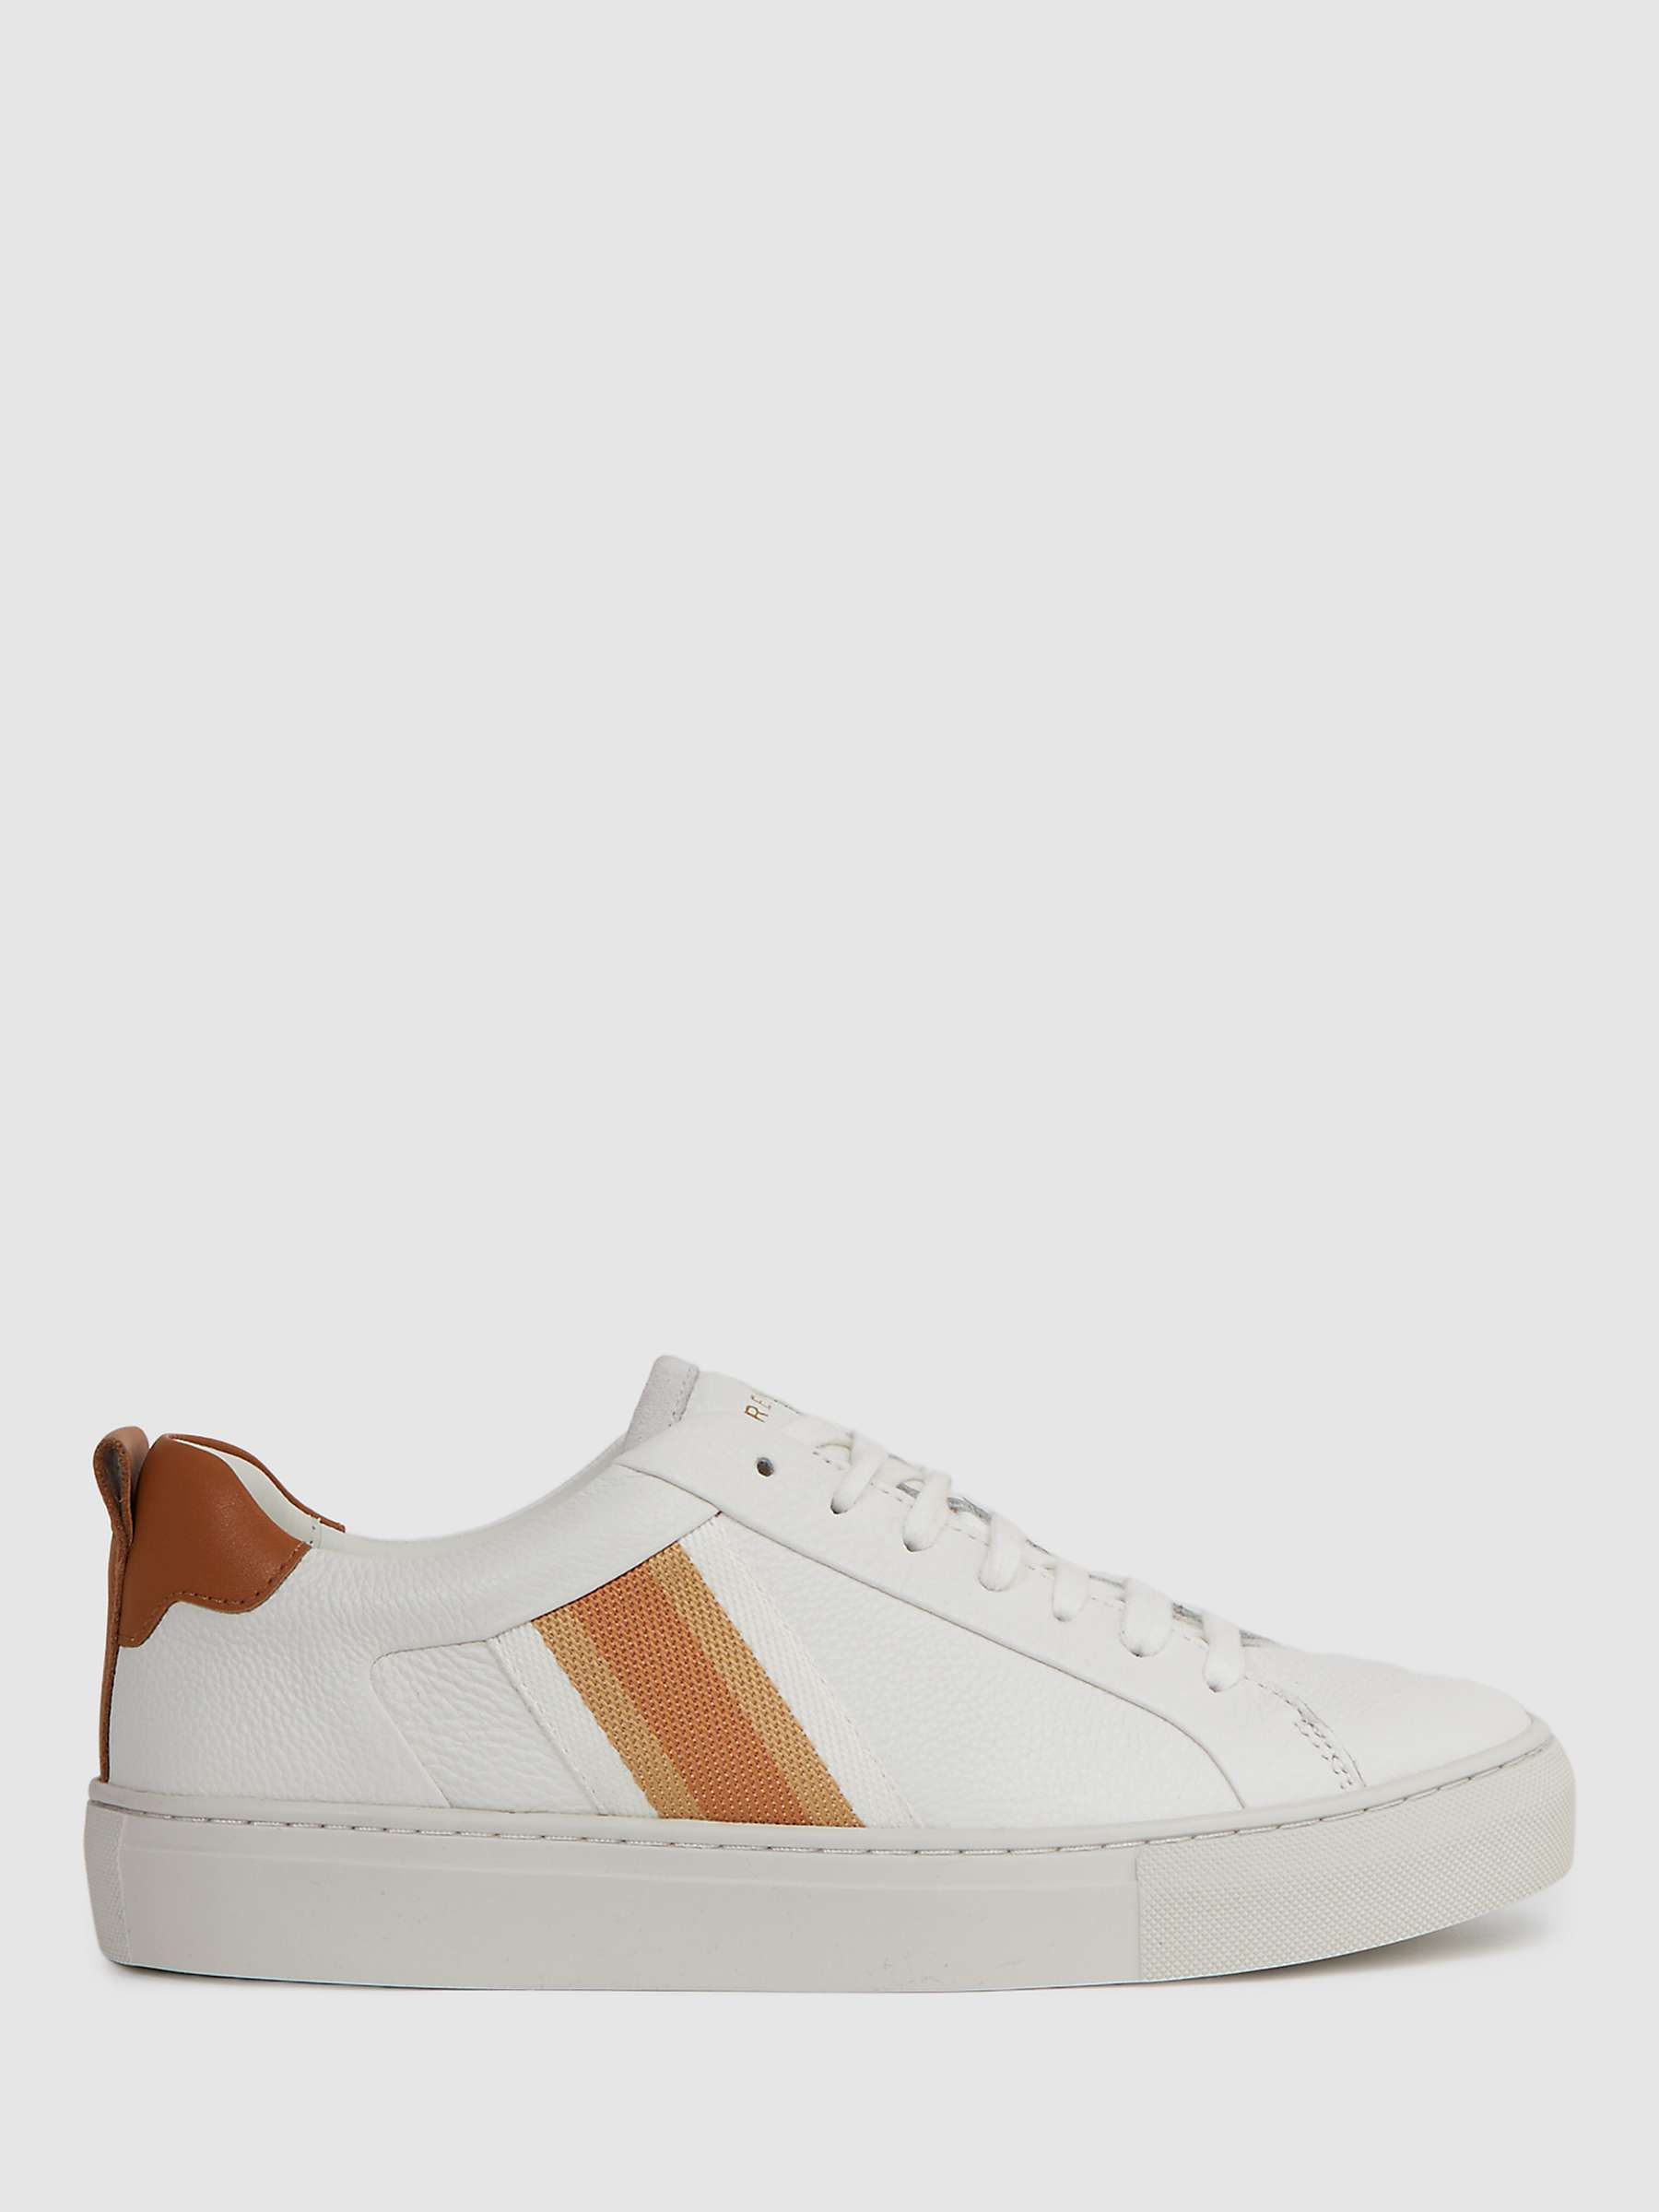 Buy Reiss Sonia Leather Side Stripe Trainers Online at johnlewis.com